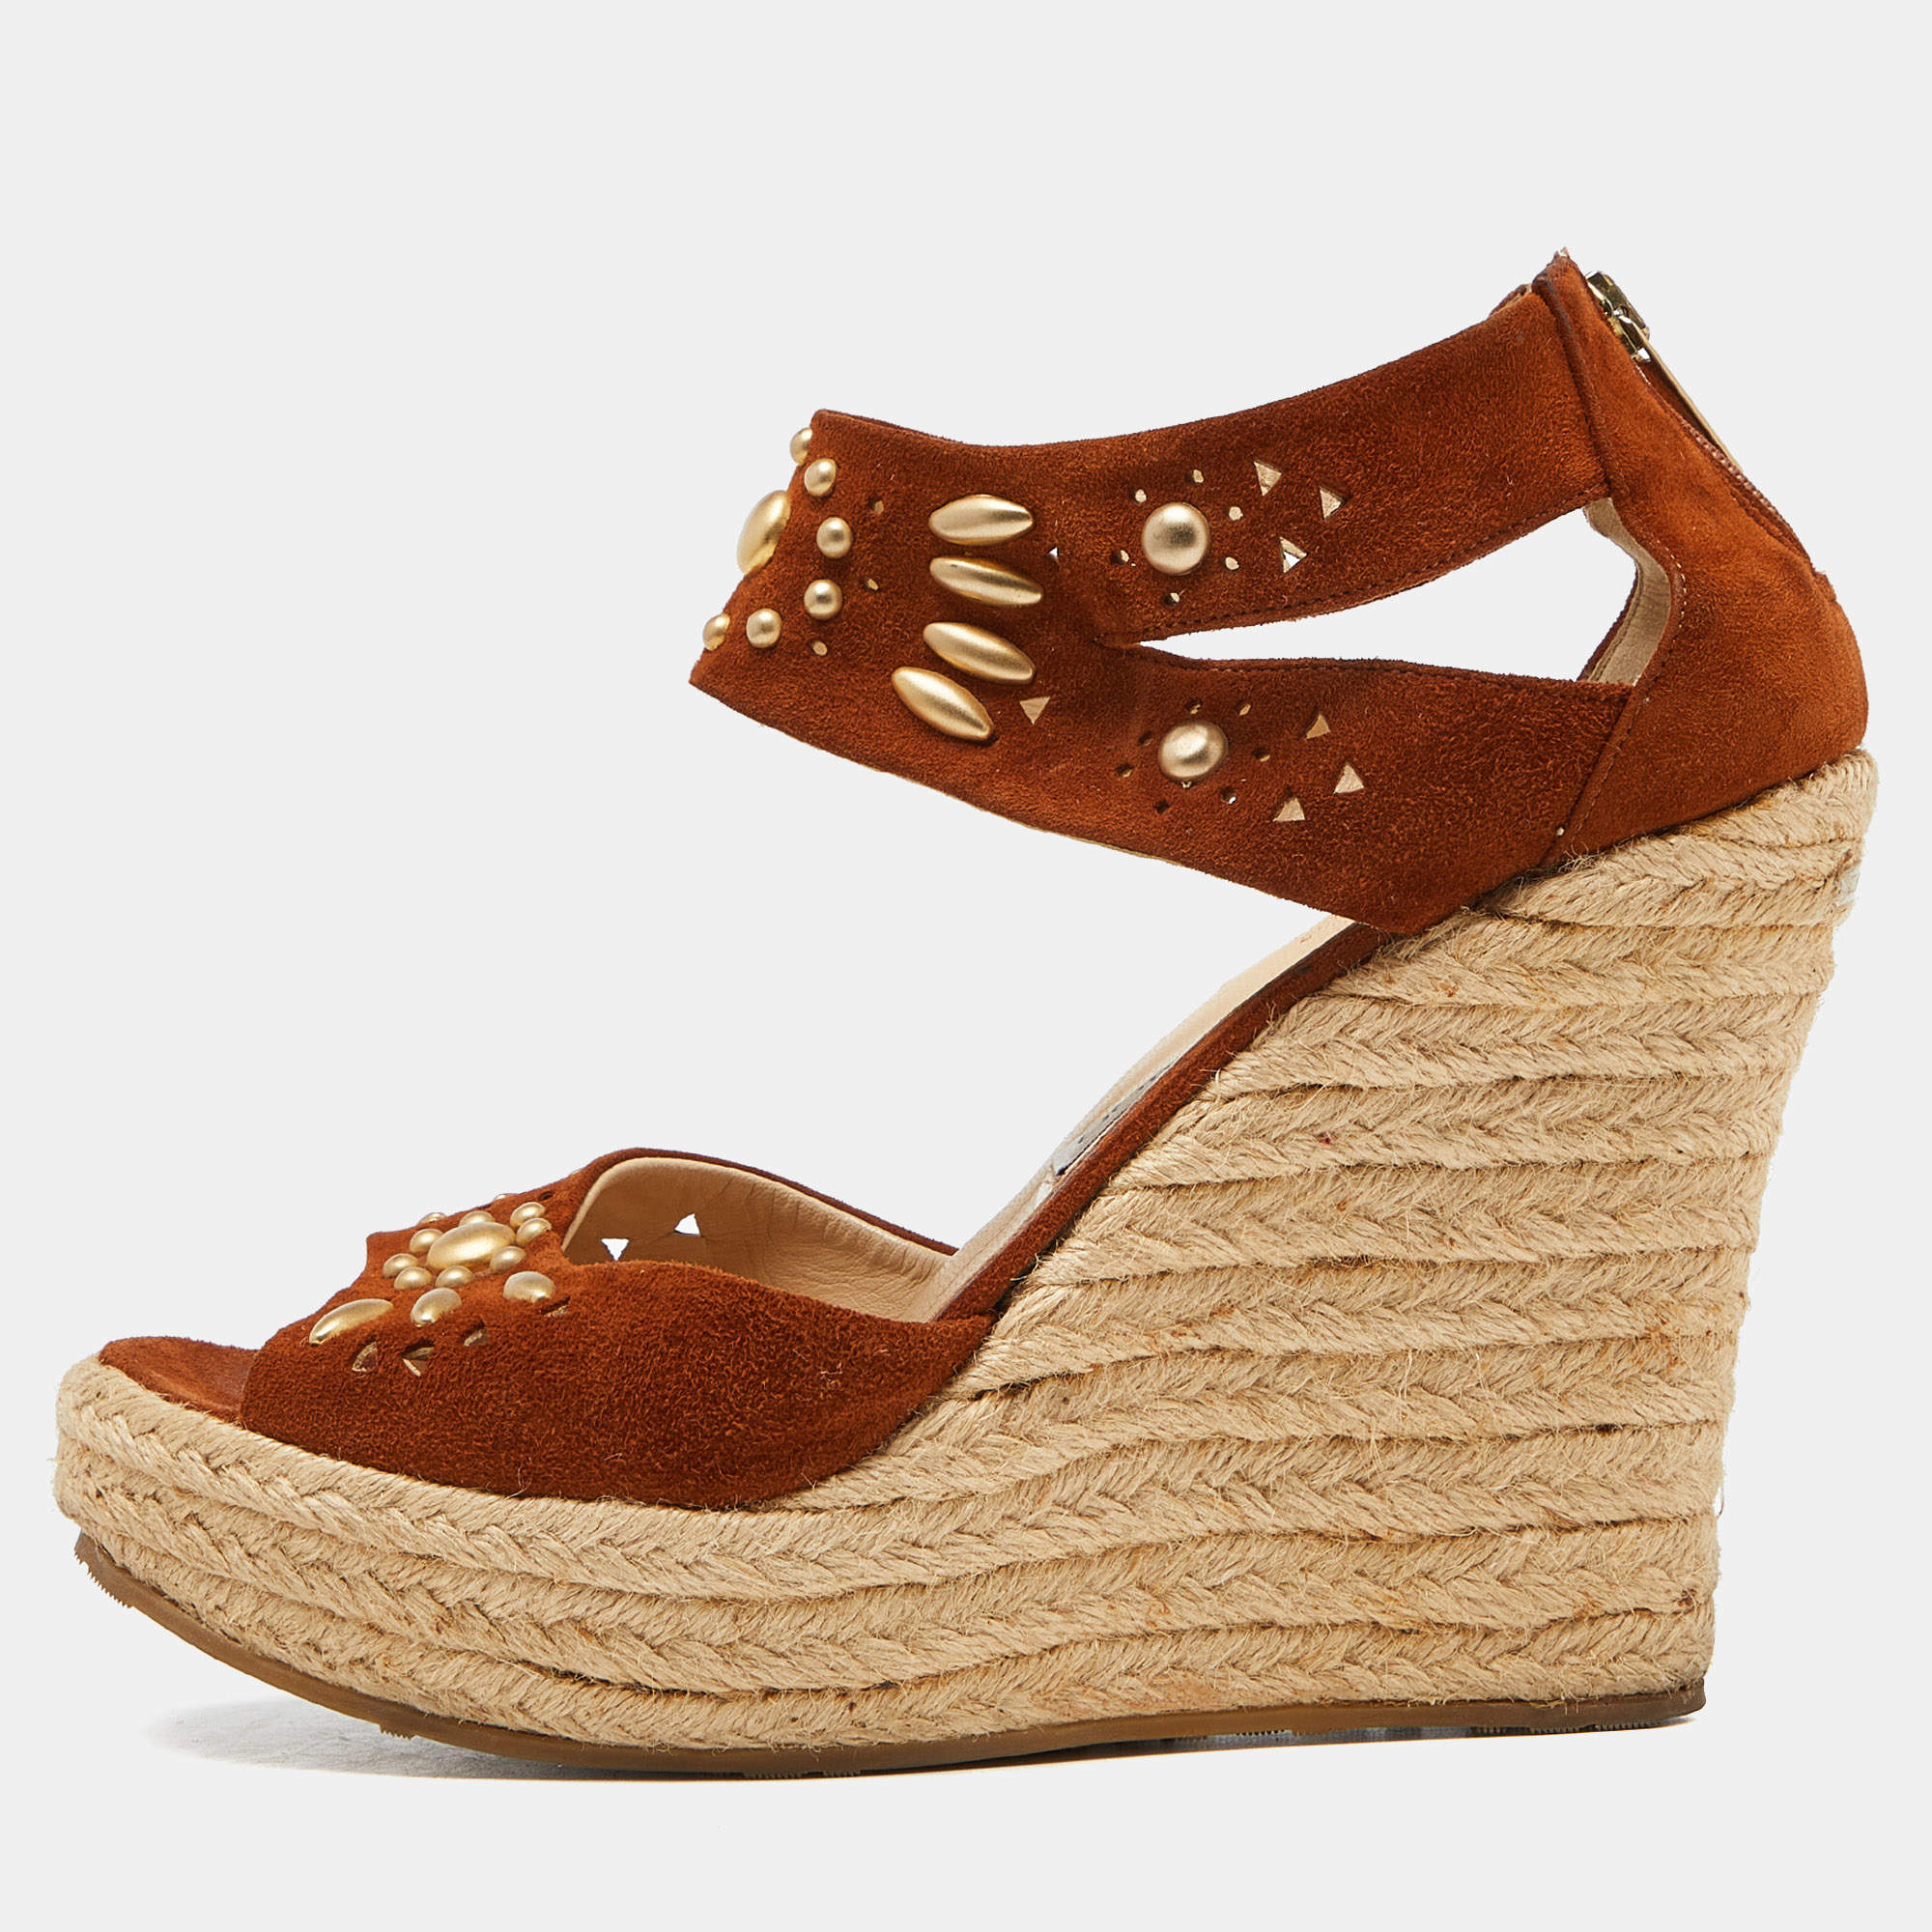 Jimmy Choo Brown Suede Wedge Sandals Size 40.5